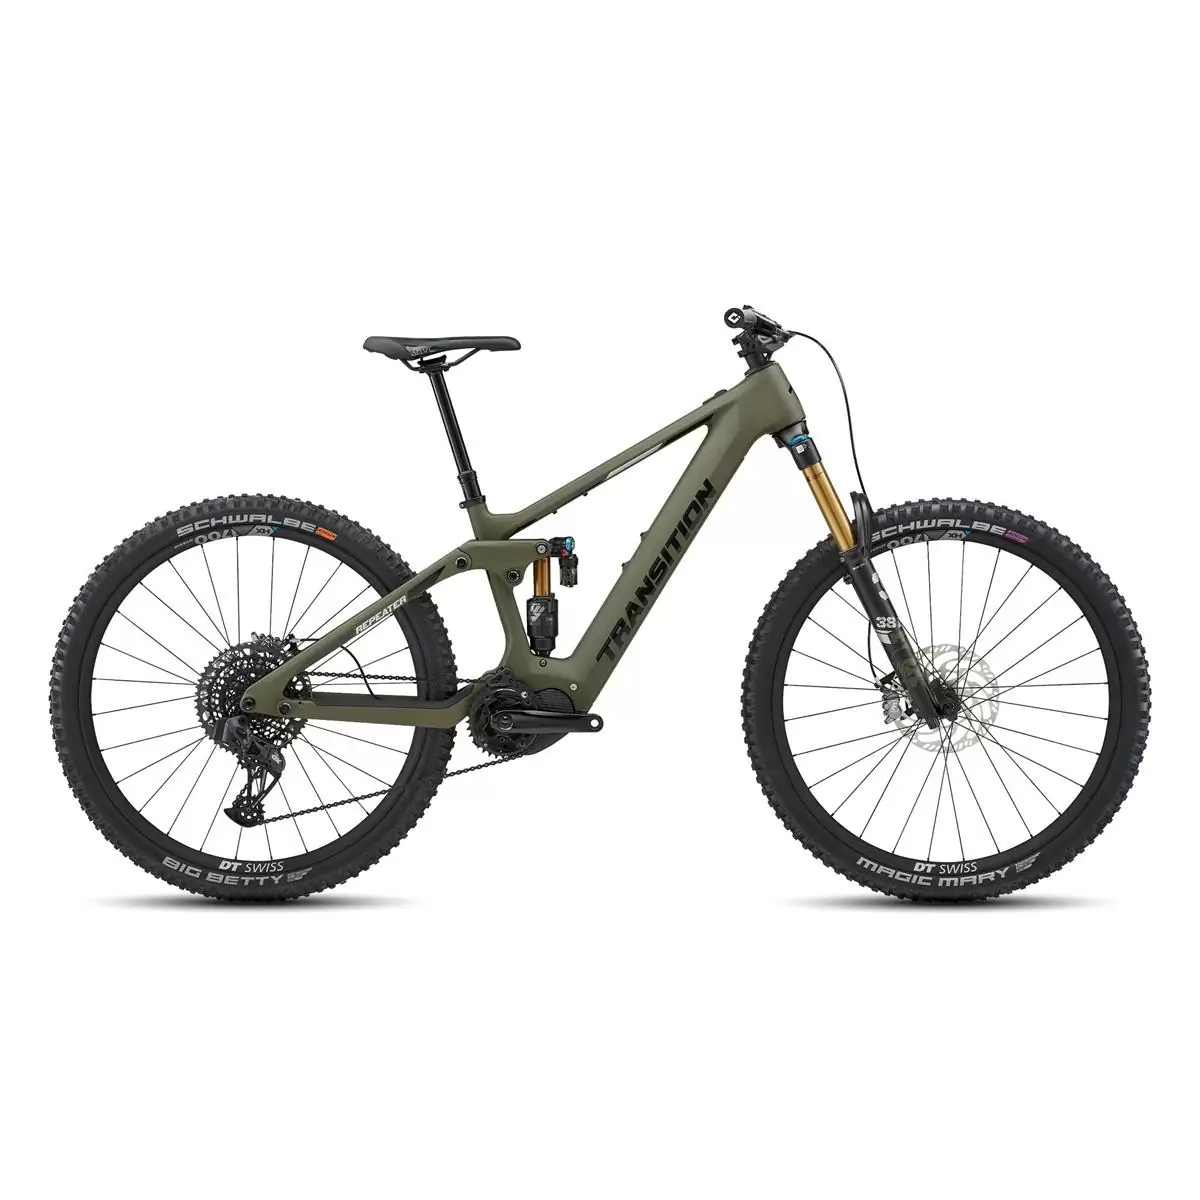 Repeater Carbon AXS 29'' 160mm 12s 630Wh Shimano EP8 Mossy Green 2022 Size S - image